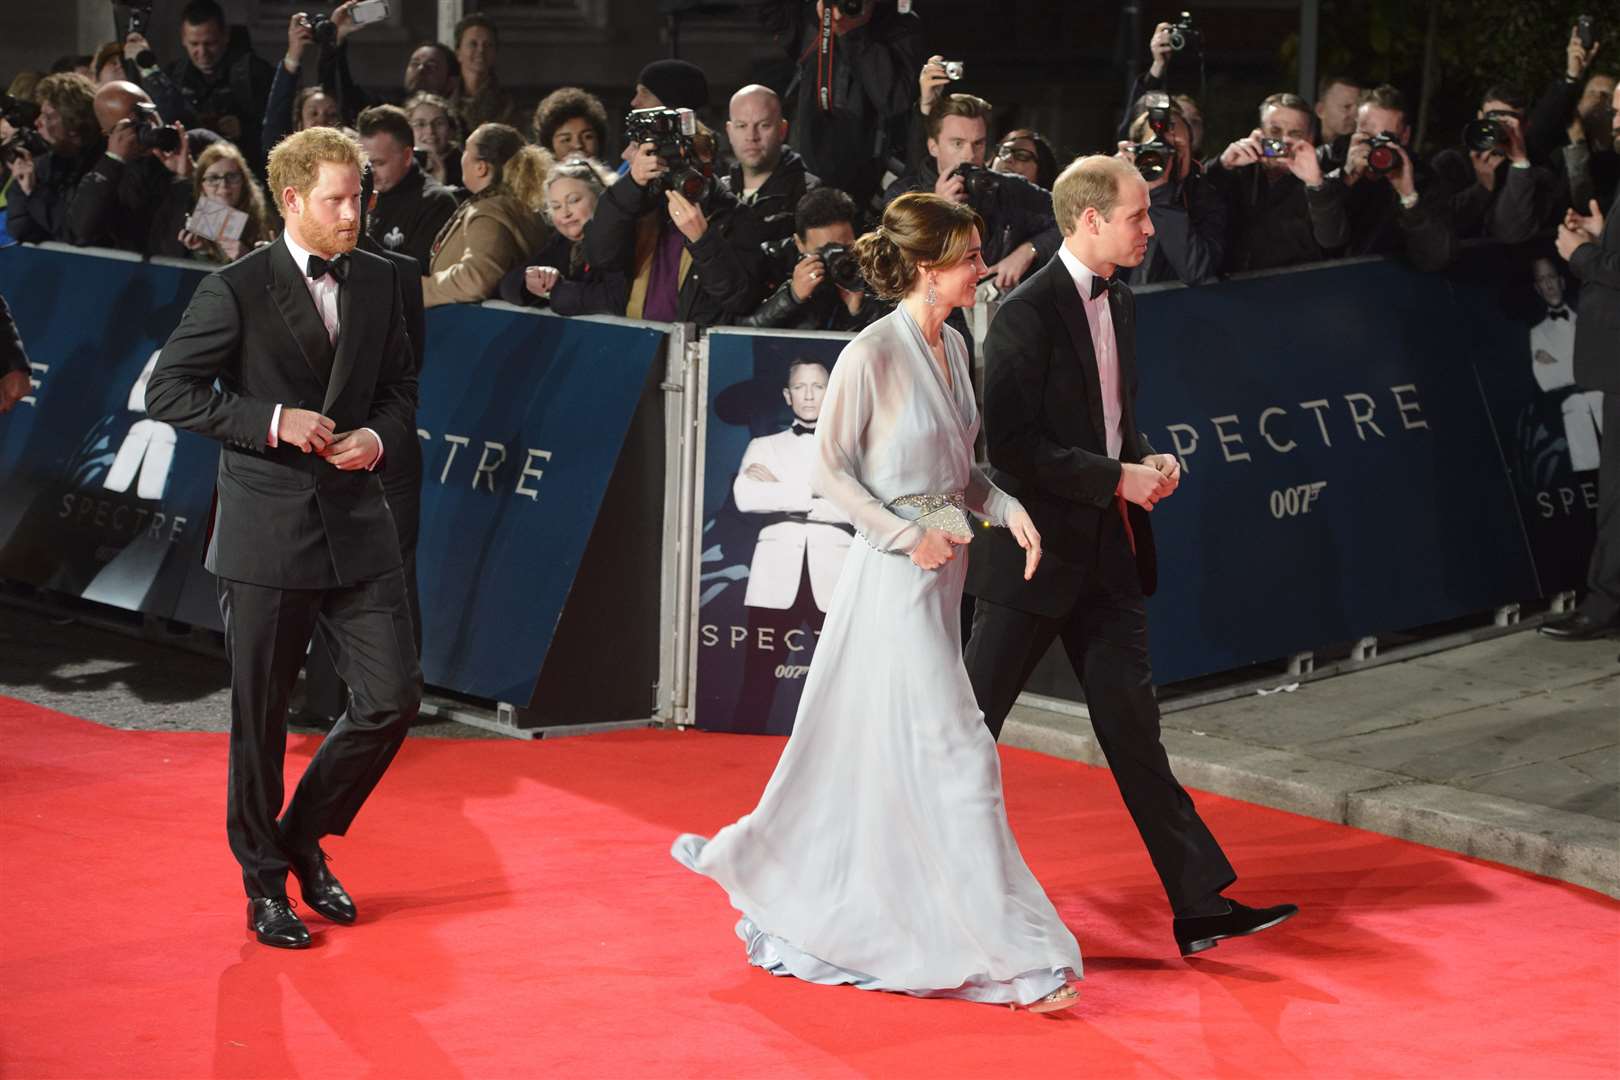 The Duke and Duchess of Cambridge with Prince Harry attending the world premiere of Spectre in 2015 (Matt Crossick/PA)